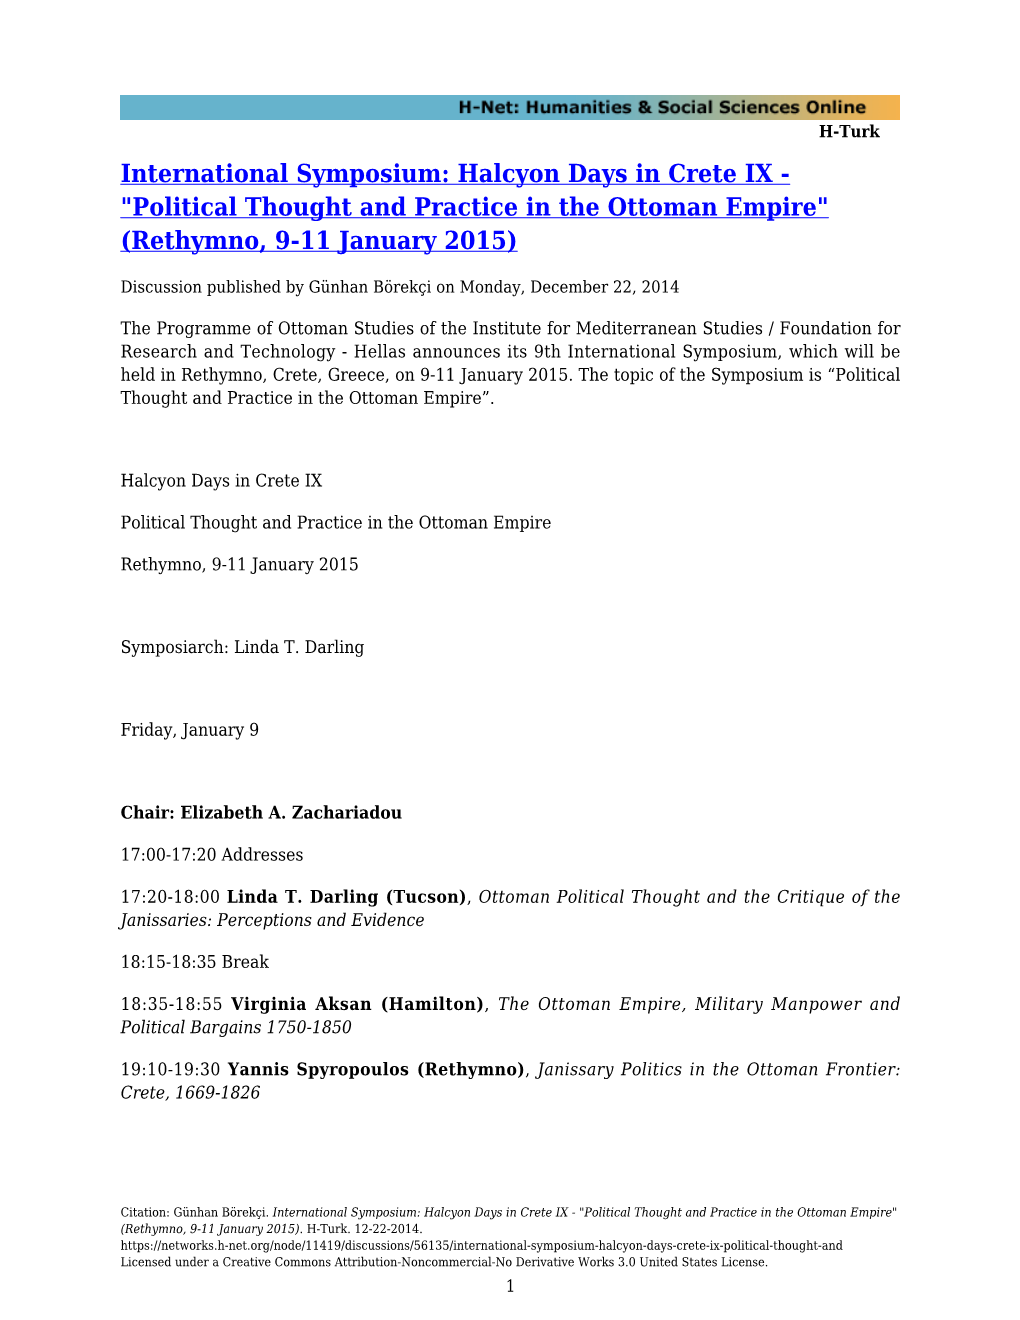 Political Thought and Practice in the Ottoman Empire" (Rethymno, 9-11 January 2015)